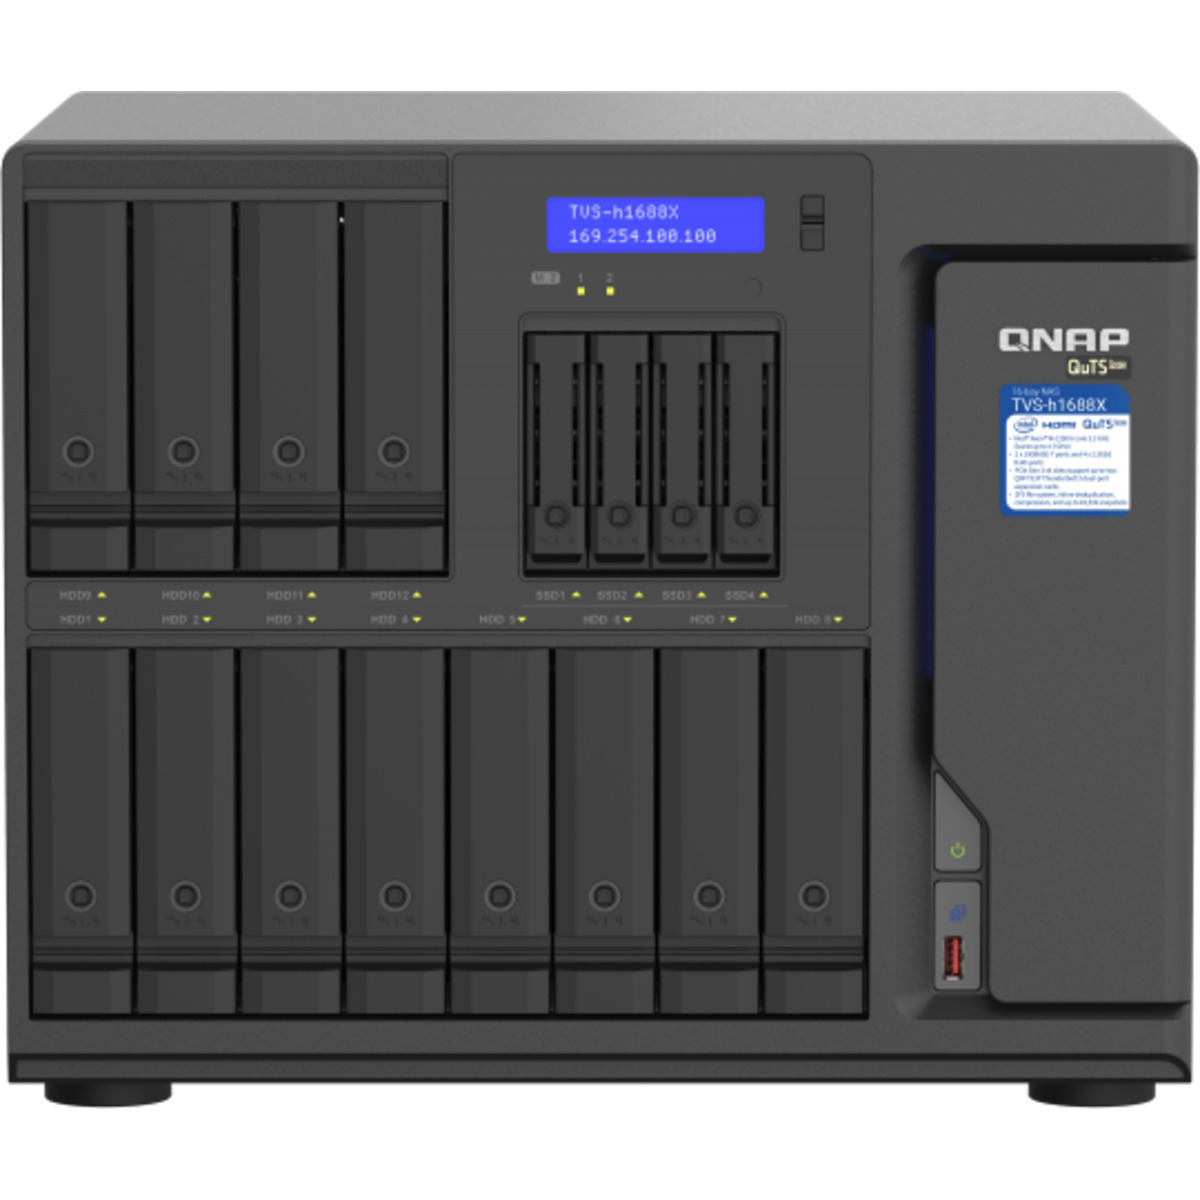 QNAP TVS-h1688X QuTS hero NAS 96tb 12+4-Bay Desktop Multimedia / Power User / Business NAS - Network Attached Storage Device 8x12tb Western Digital Red Pro WD121KFBX 3.5 7200rpm SATA 6Gb/s HDD NAS Class Drives Installed - Burn-In Tested TVS-h1688X QuTS hero NAS